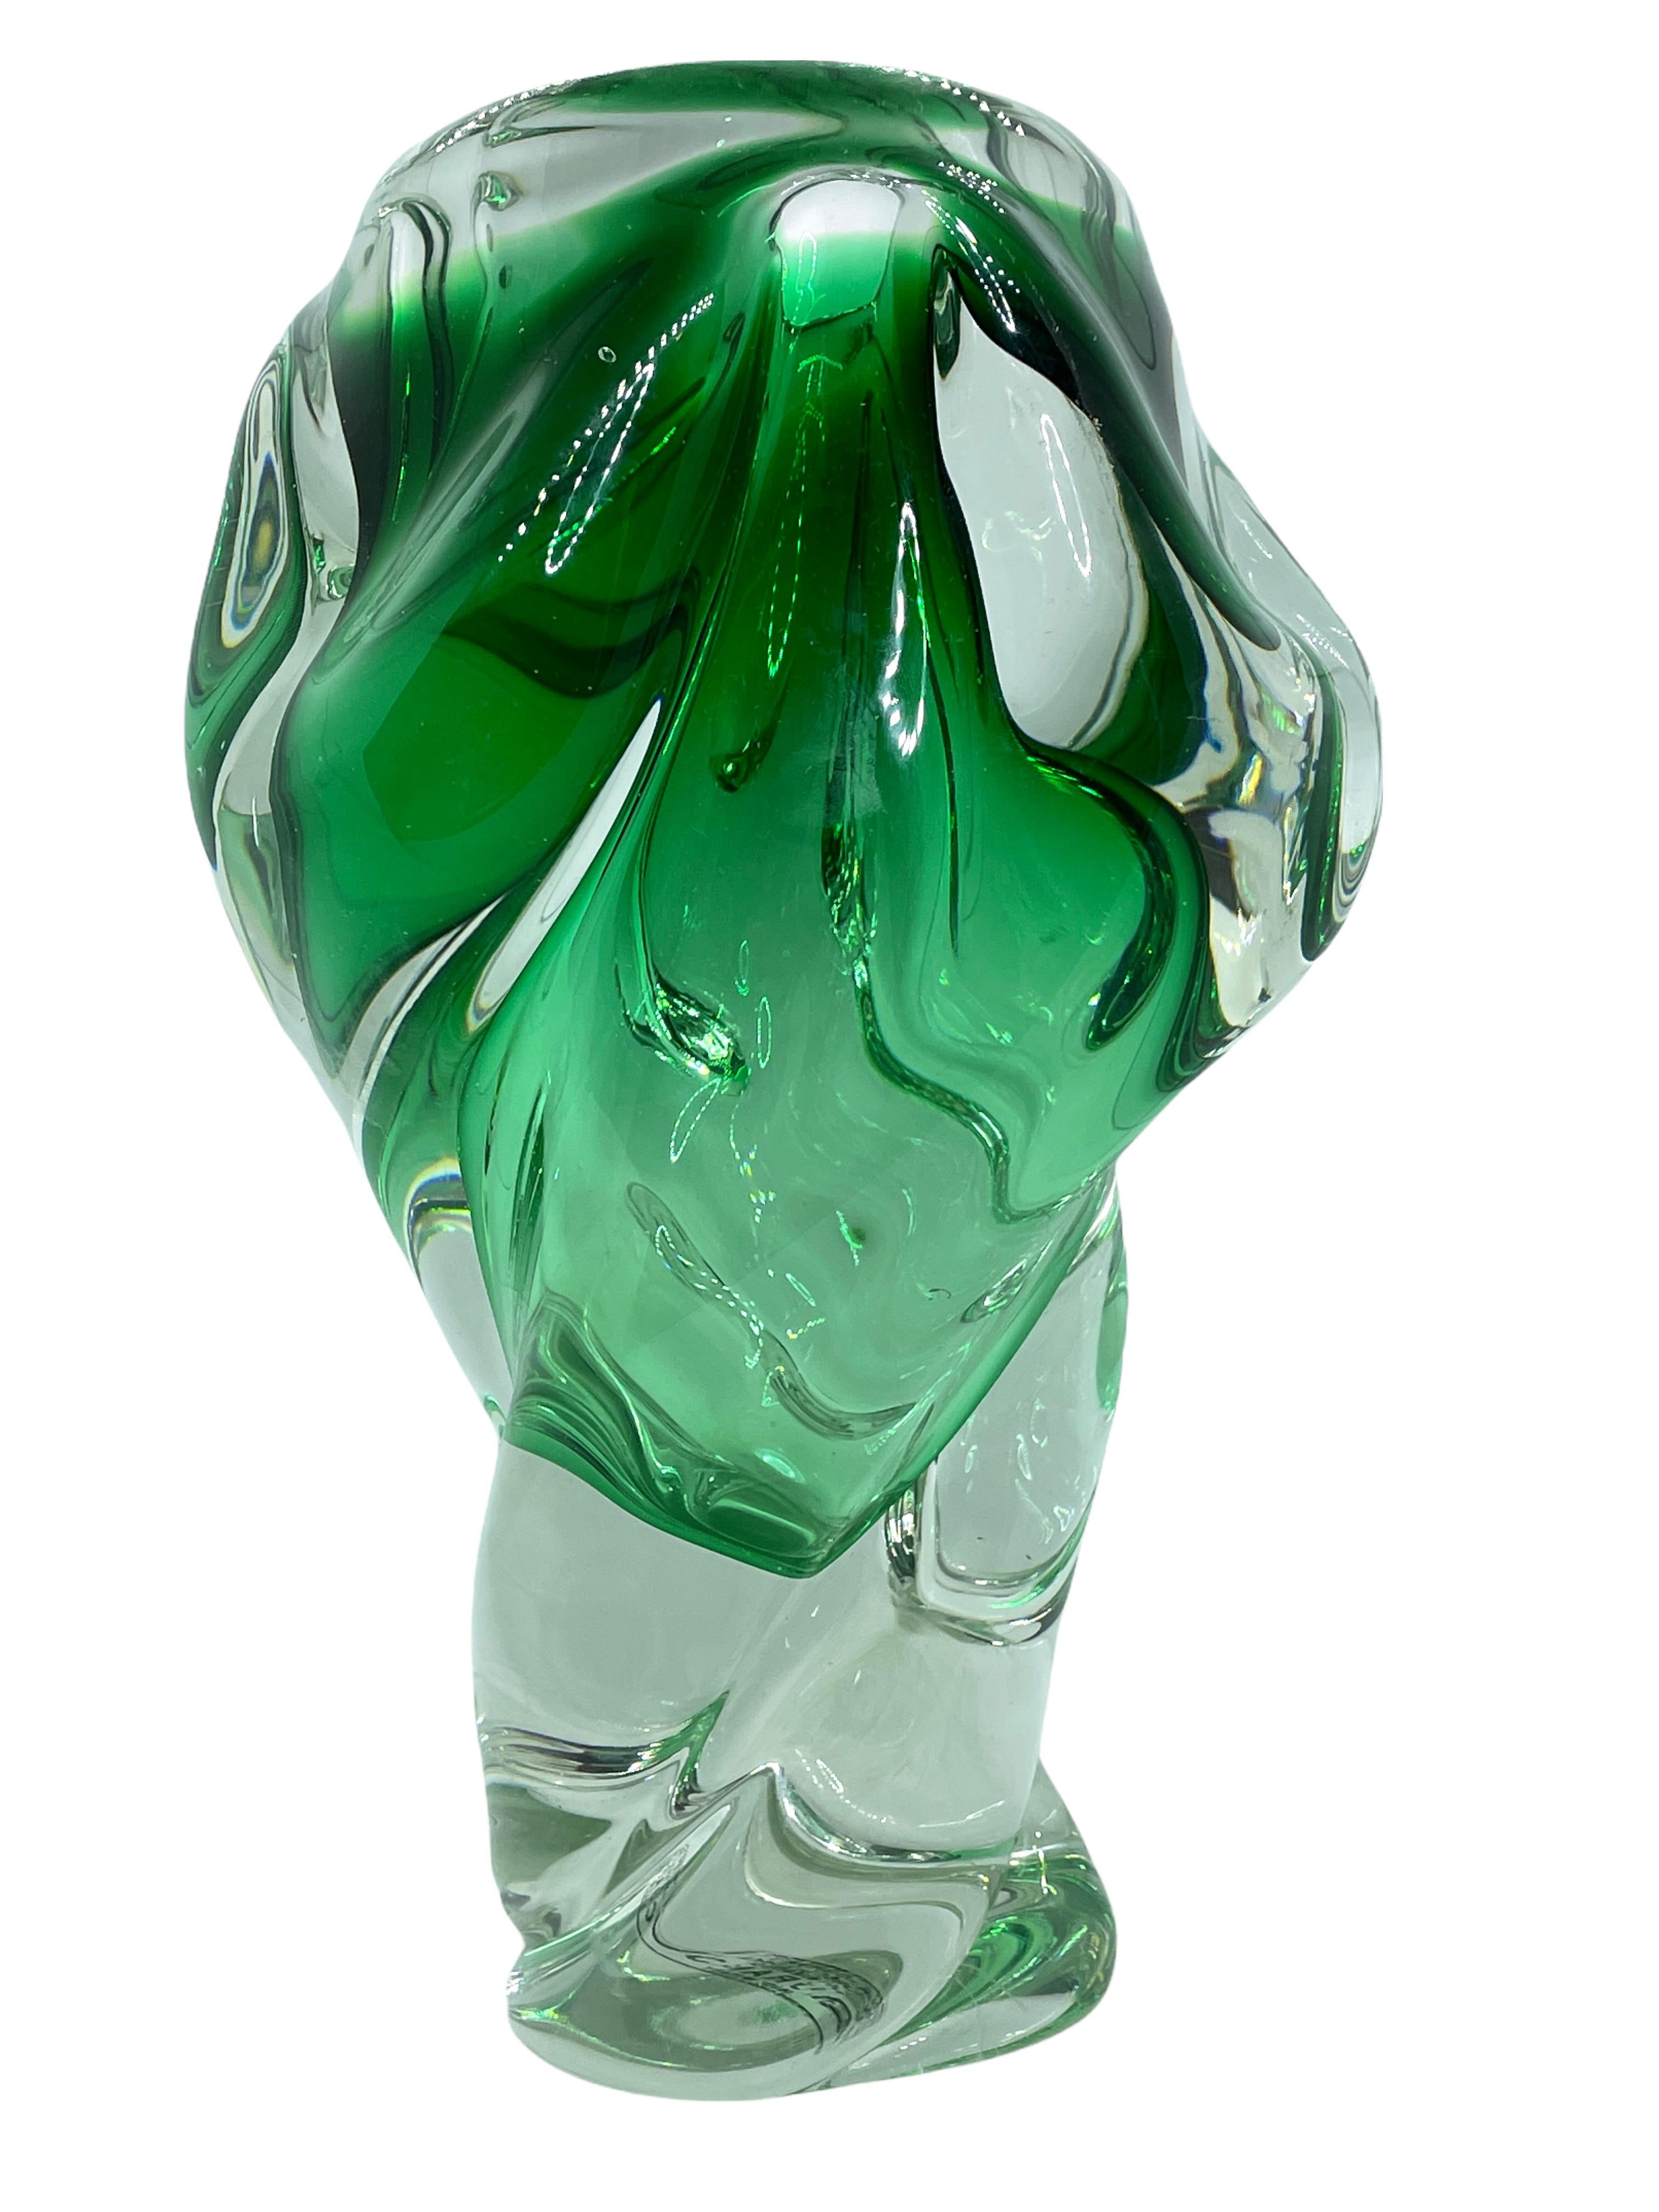 Hand-Crafted Green and Clear Sommerso Art Glass Vase Object Sculpture Murano, Italy, 1980s